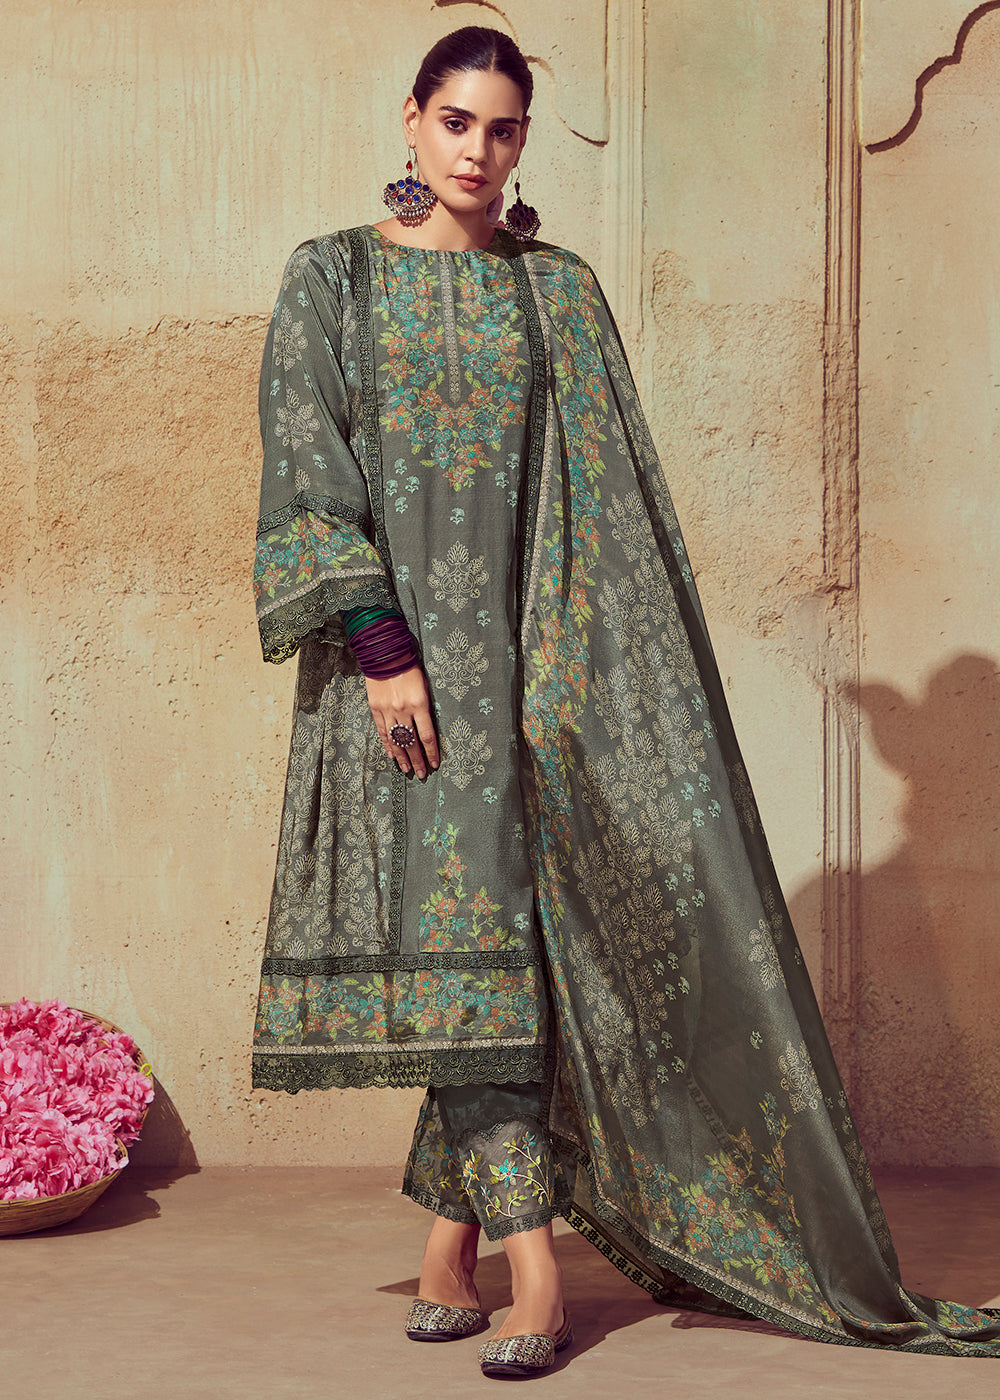 Buy Now Digital Printed & Embroidered Moss Grey Muslin Salwar Suit Online in USA, UK, Canada, Germany, Australia & Worldwide at Empress Clothing. 